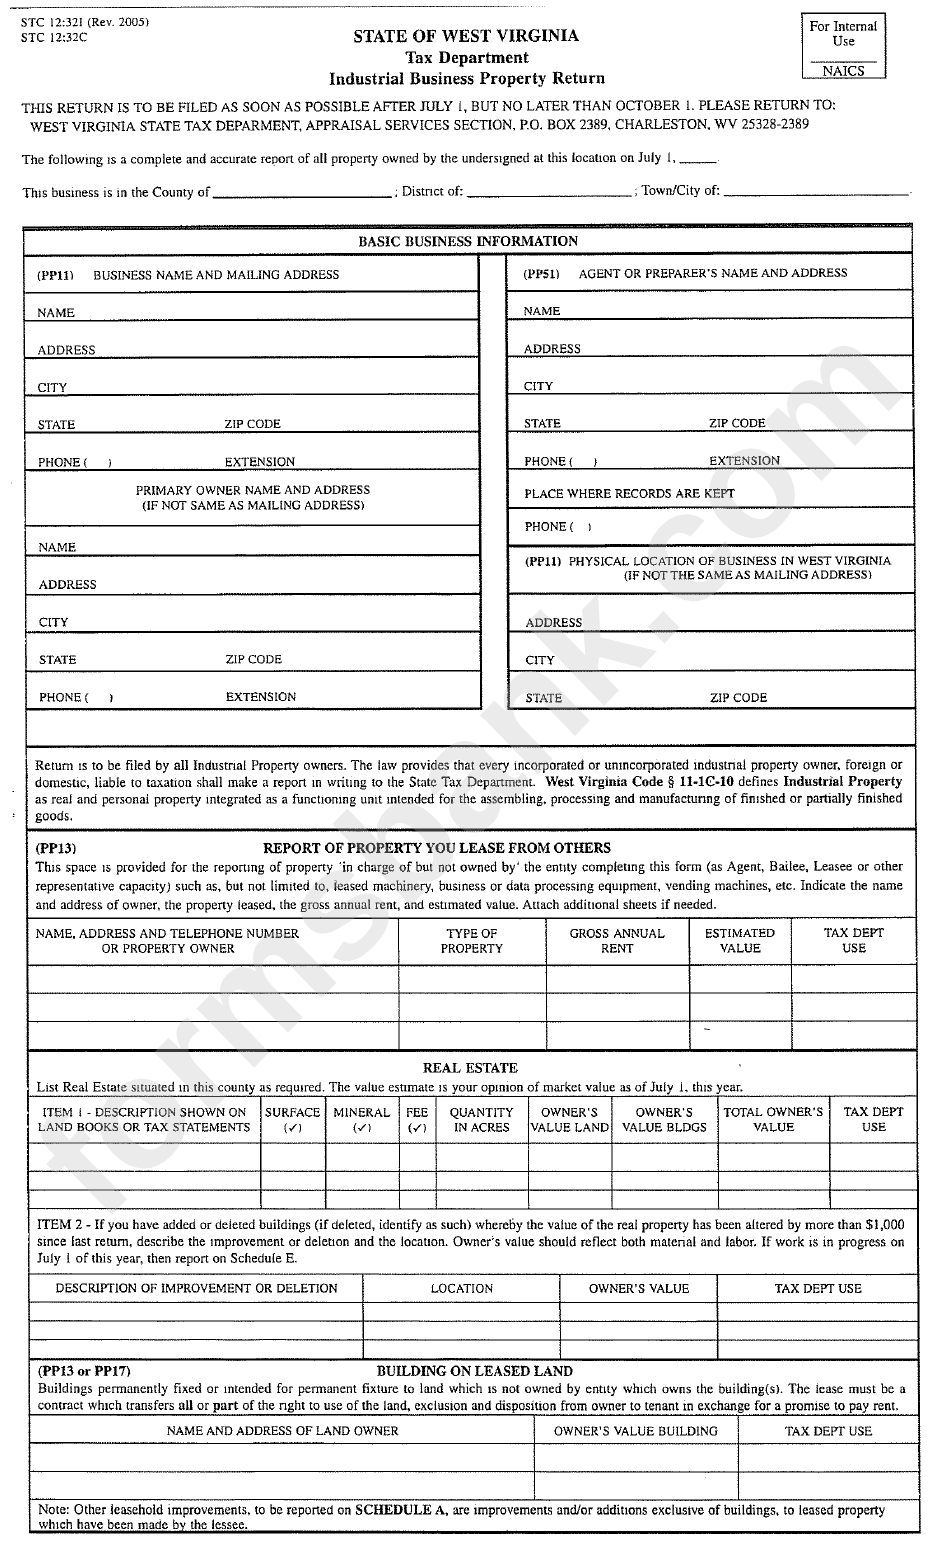 form-stc-12-321-industrial-business-property-return-form-printable